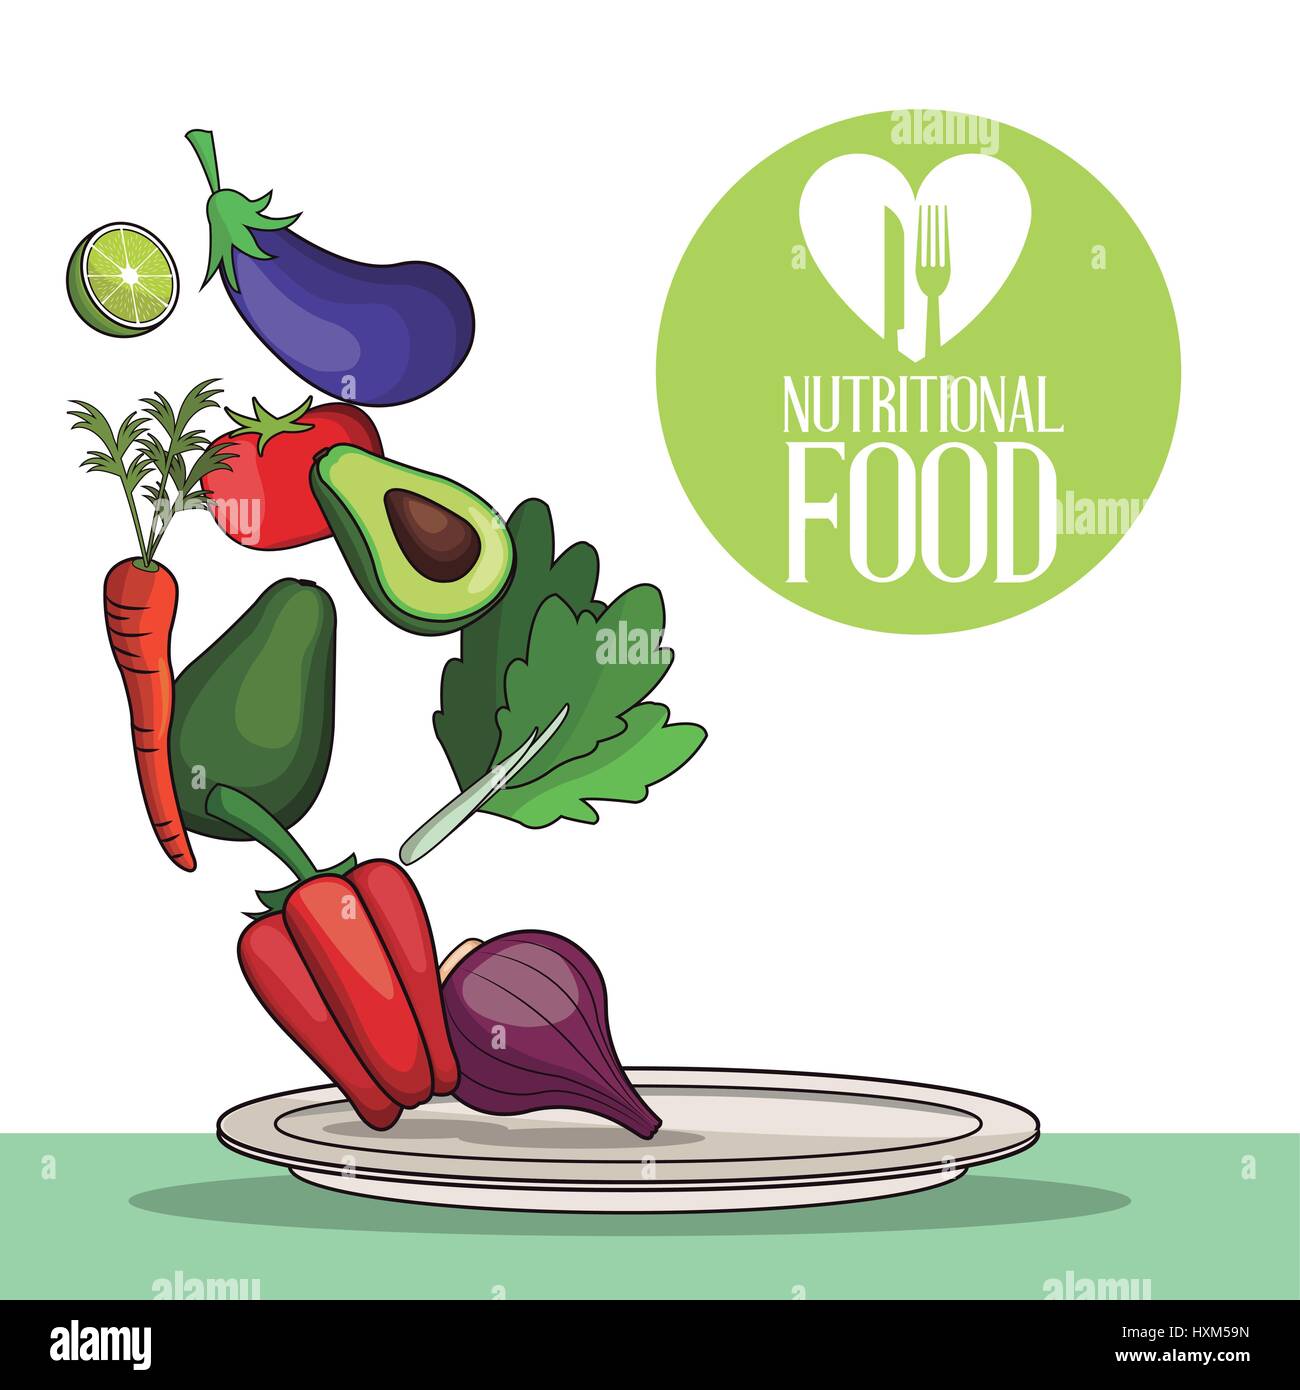 nutritional food delicious vegetable image Stock Vector